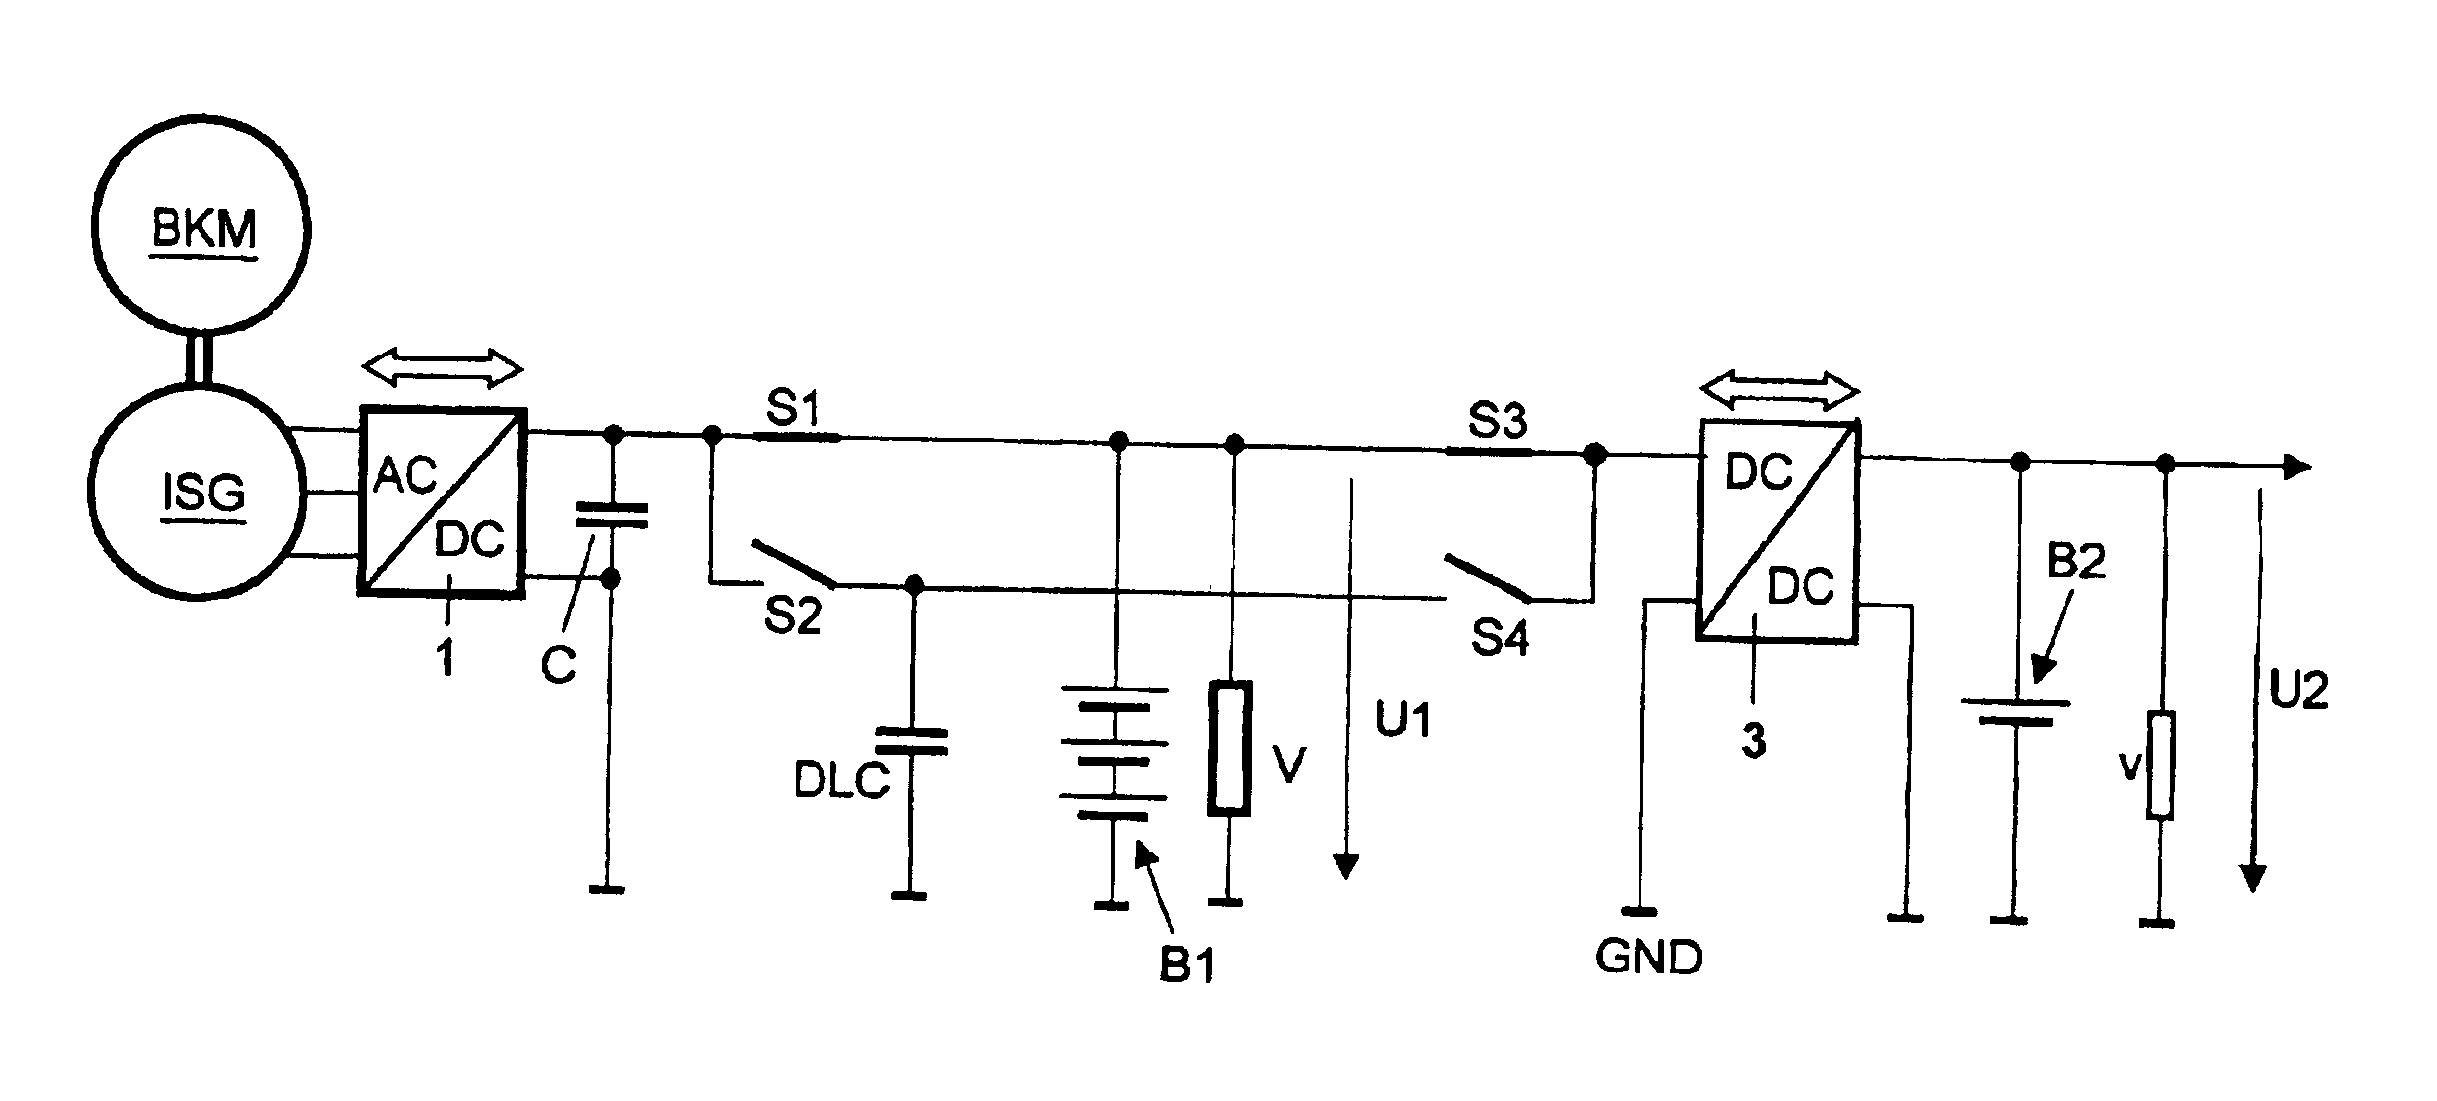 Motor vehicle electric system